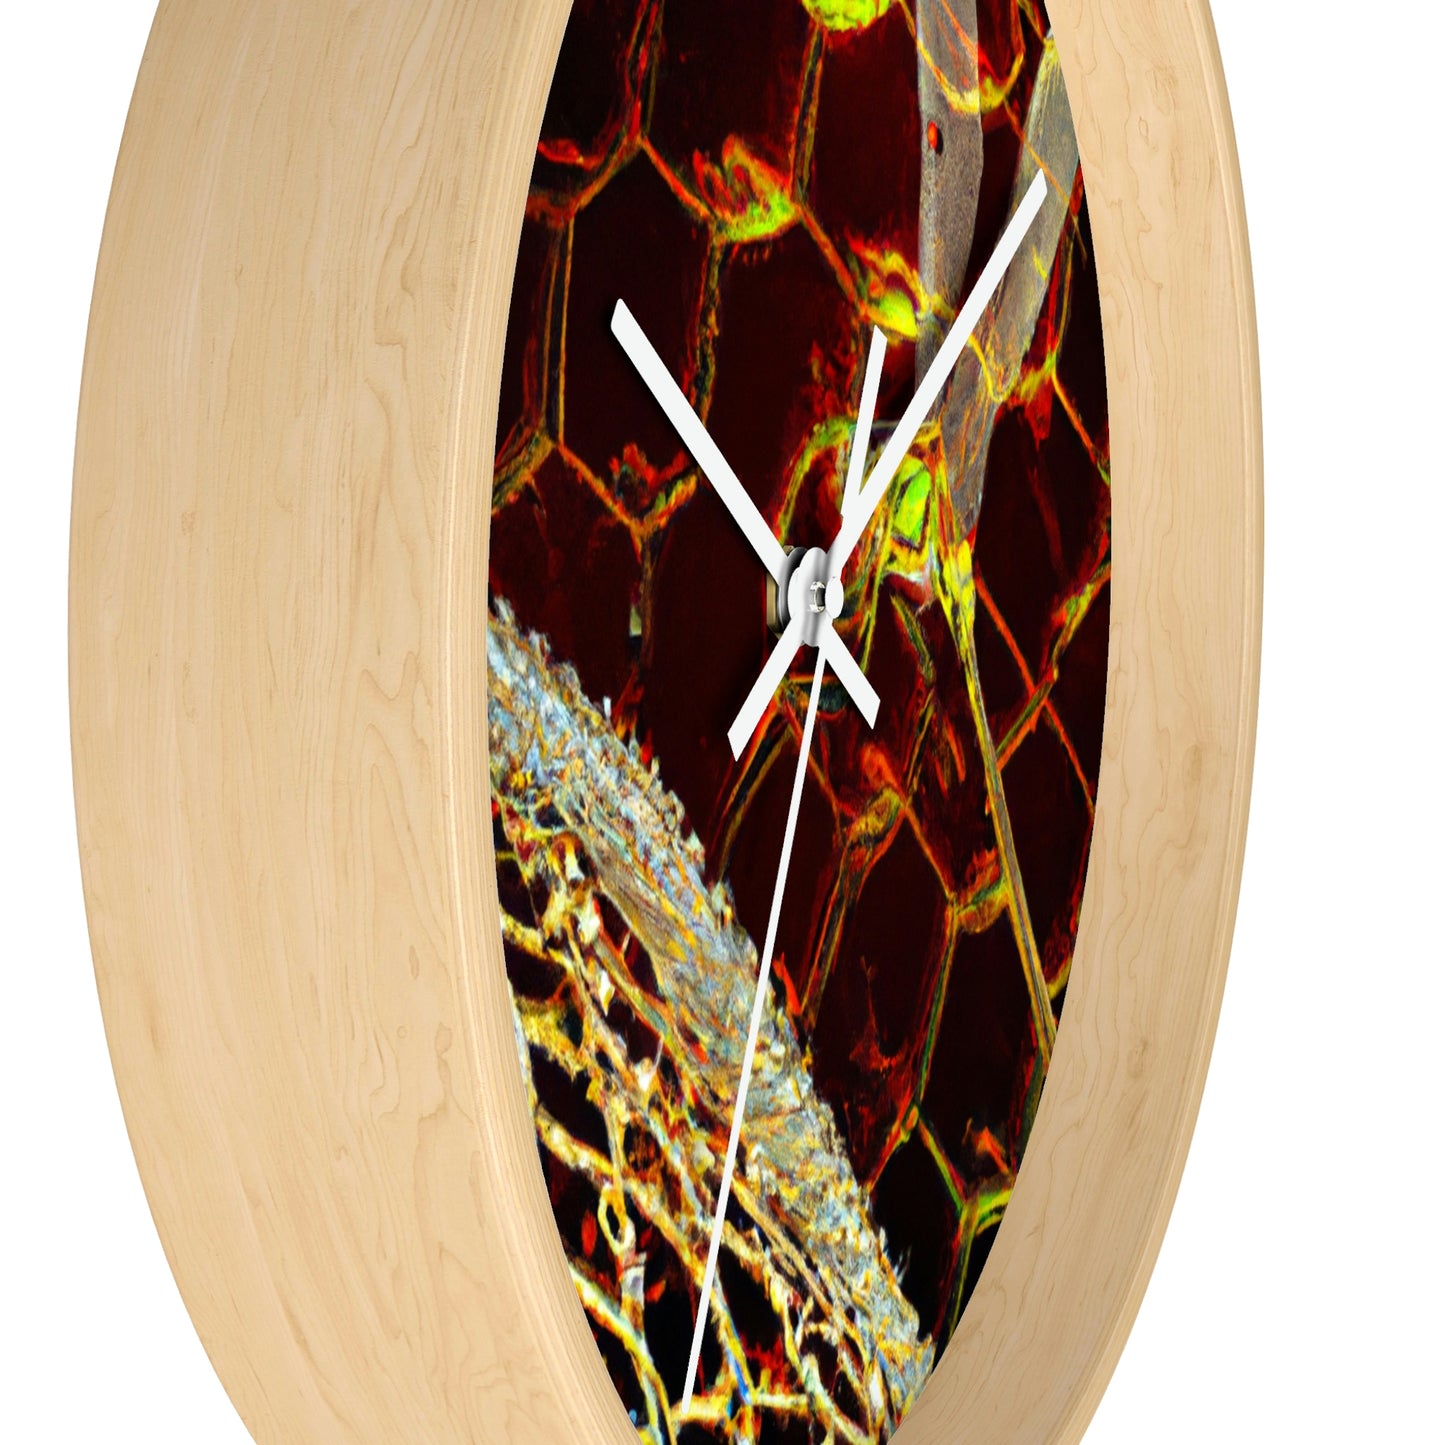 "The Dragonfly's Curse" - The Alien Wall Clock